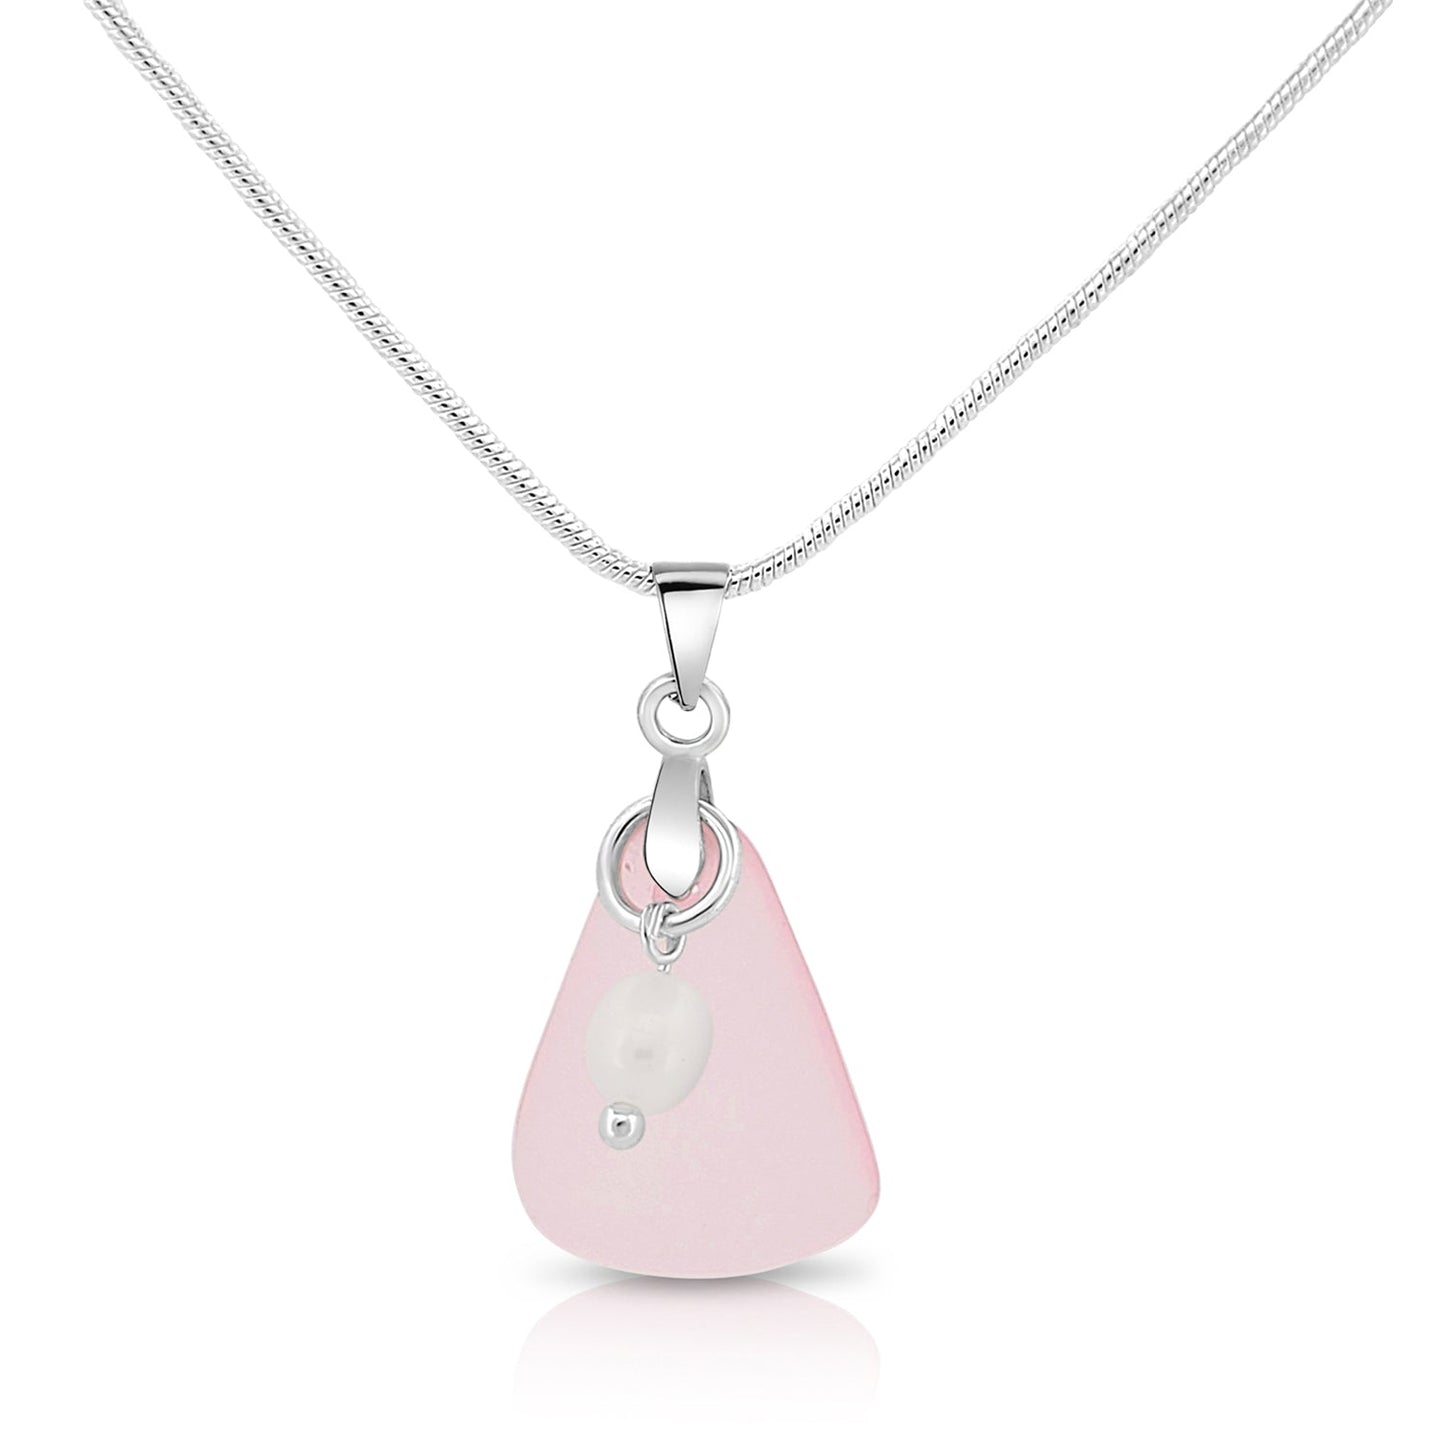 Silvertone, Clear, Pink, Seaglass and Freshwater Pearl Necklace